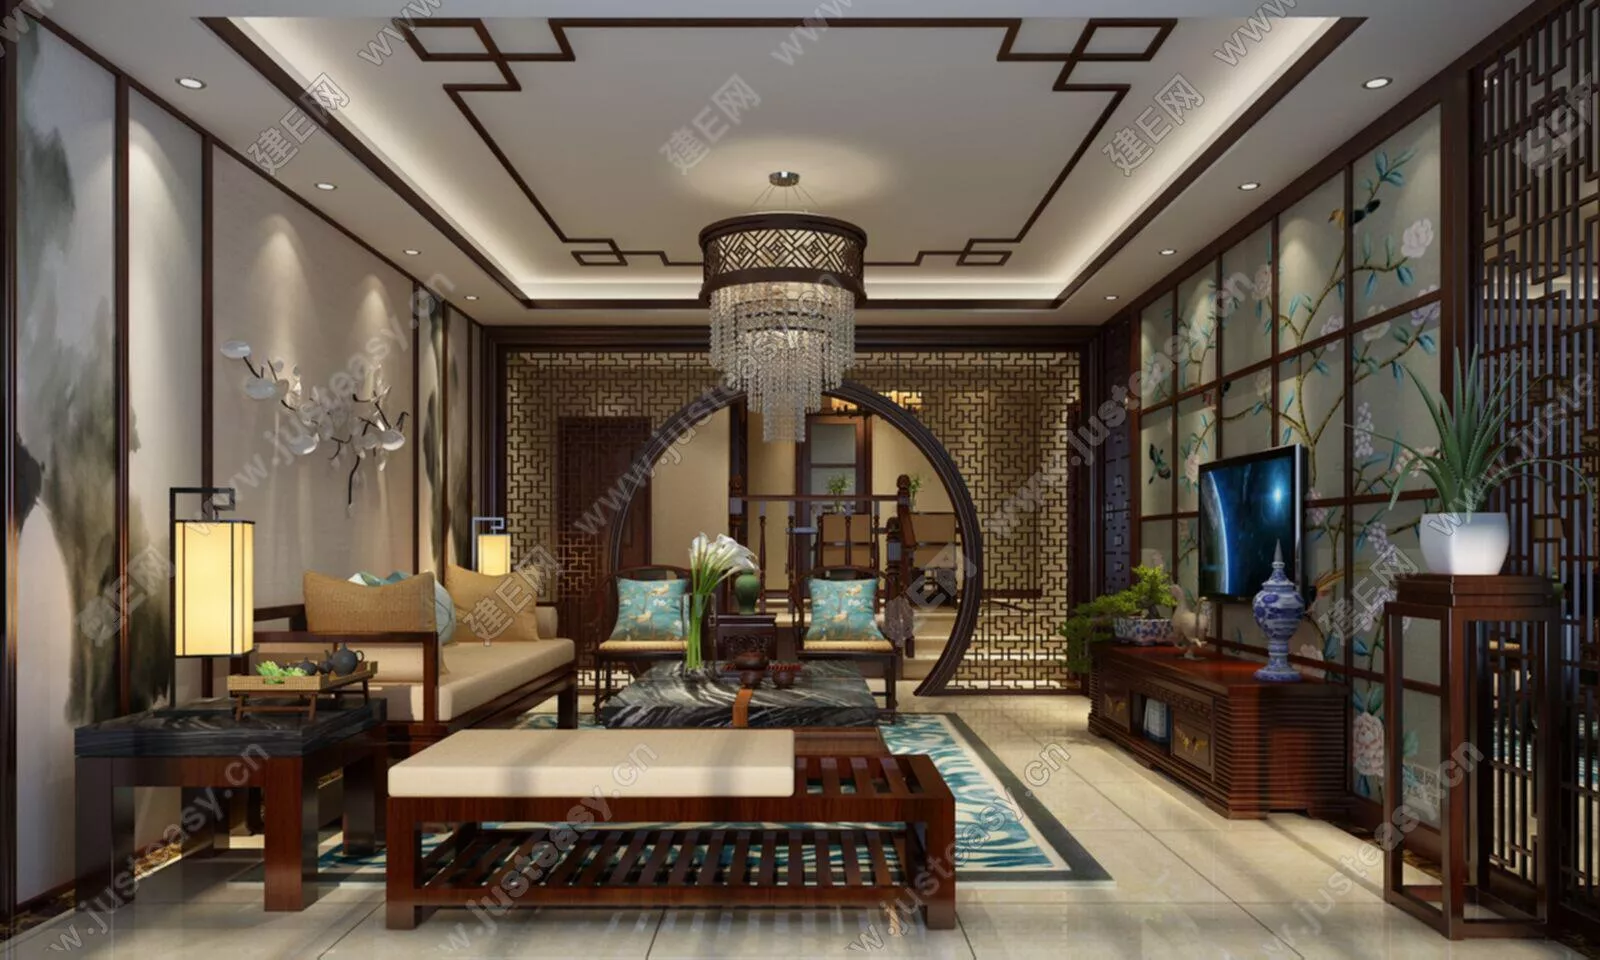 CHINESE LIVING ROOM - SKETCHUP 3D SCENE - ENSCAPE - 100811919